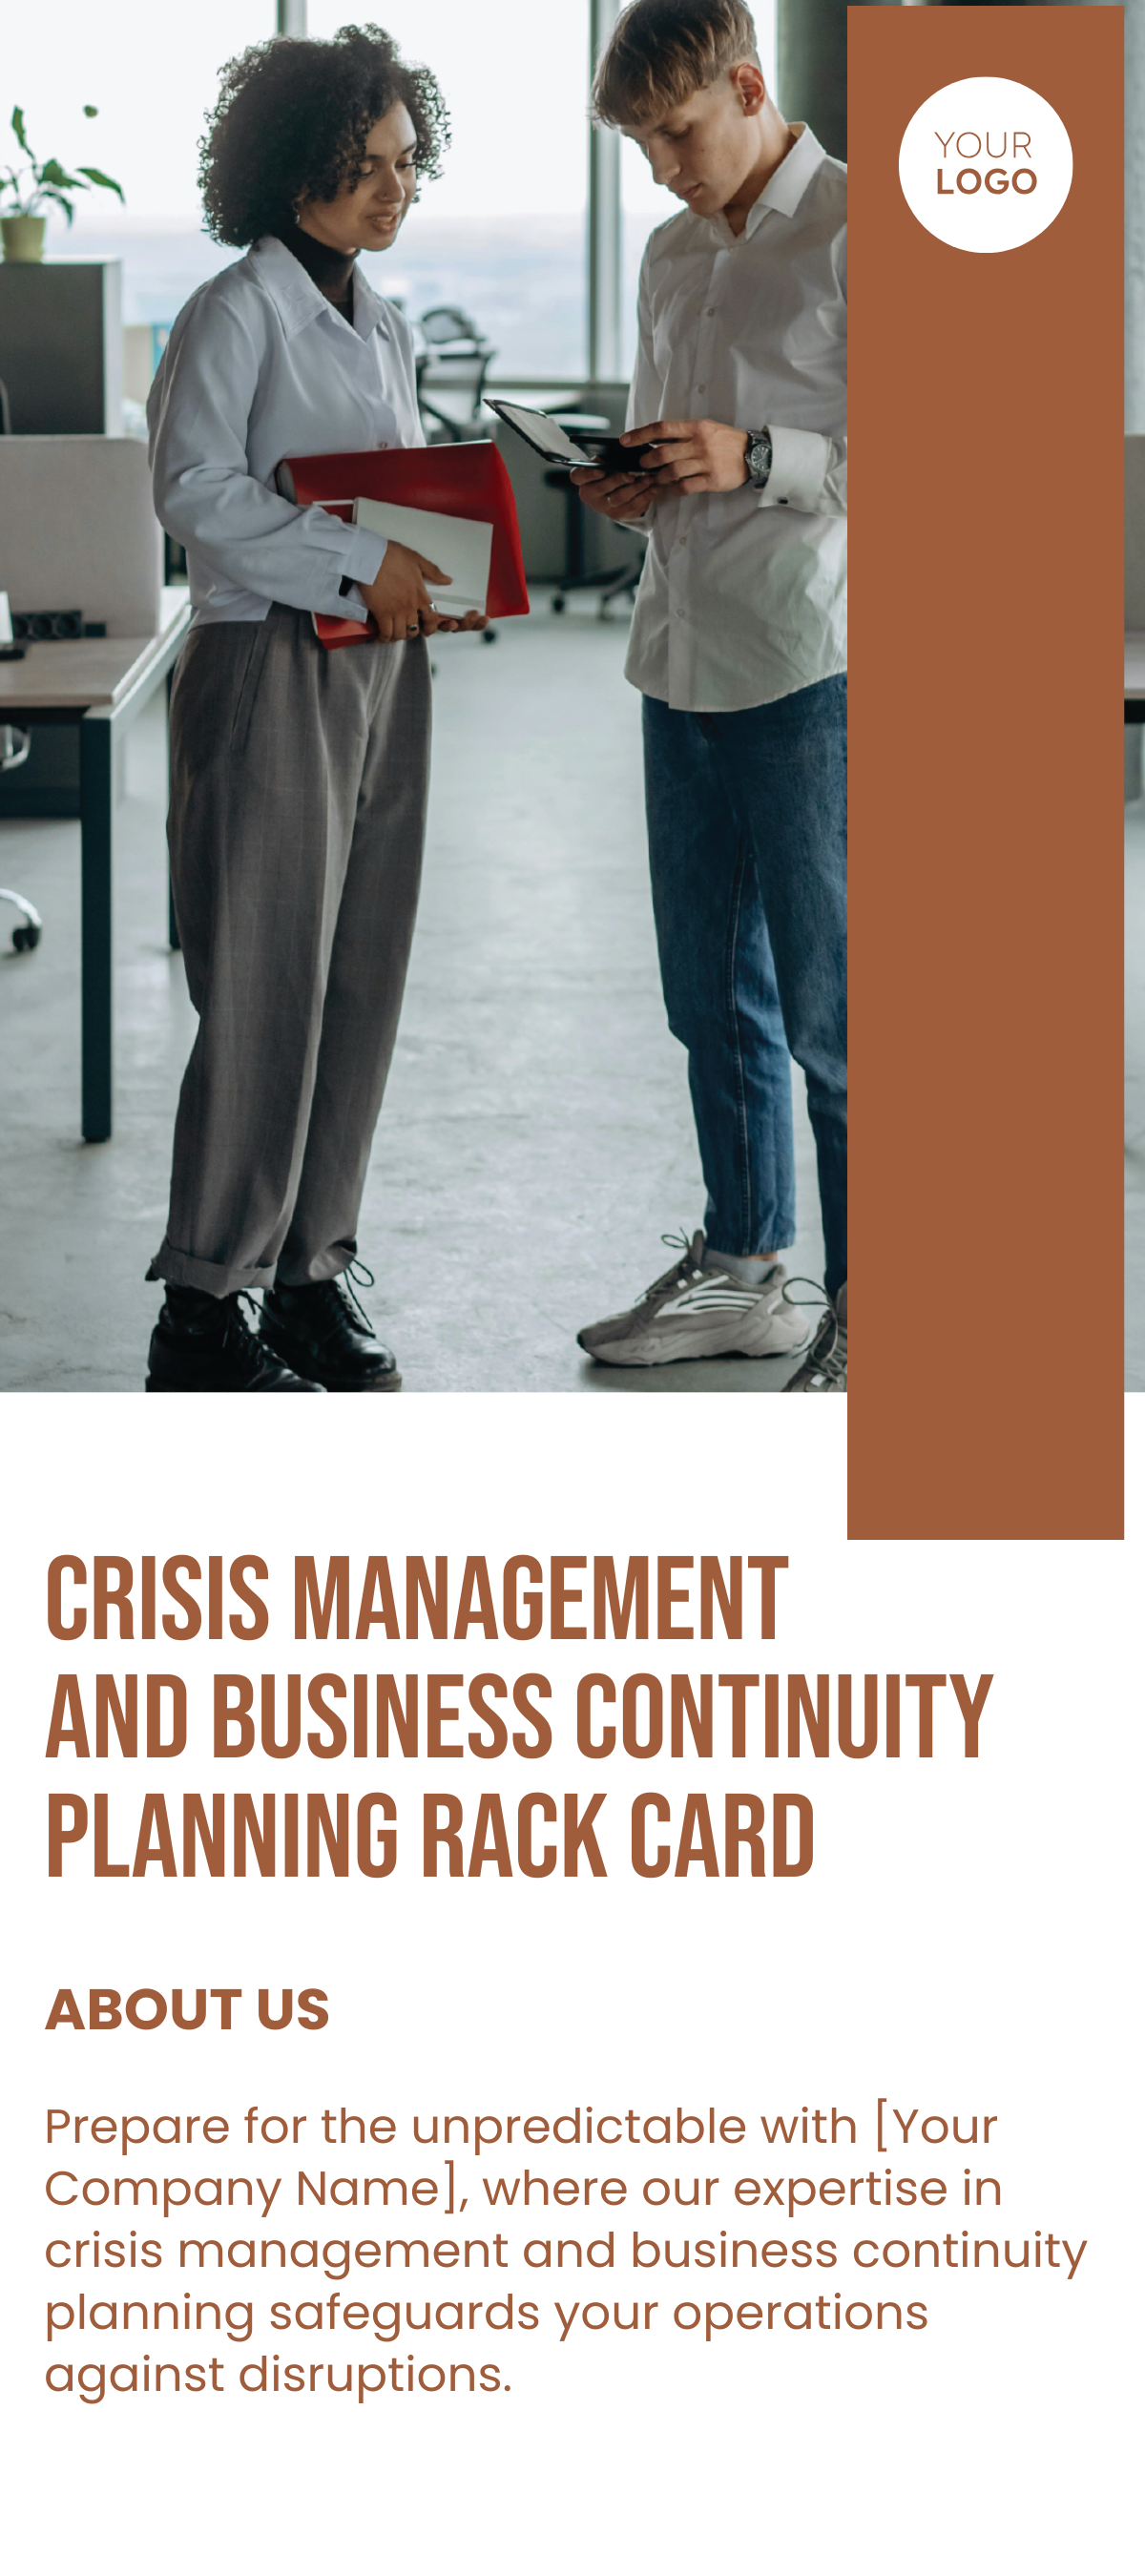 Crisis Management and Business Continuity Planning Rack Card Template